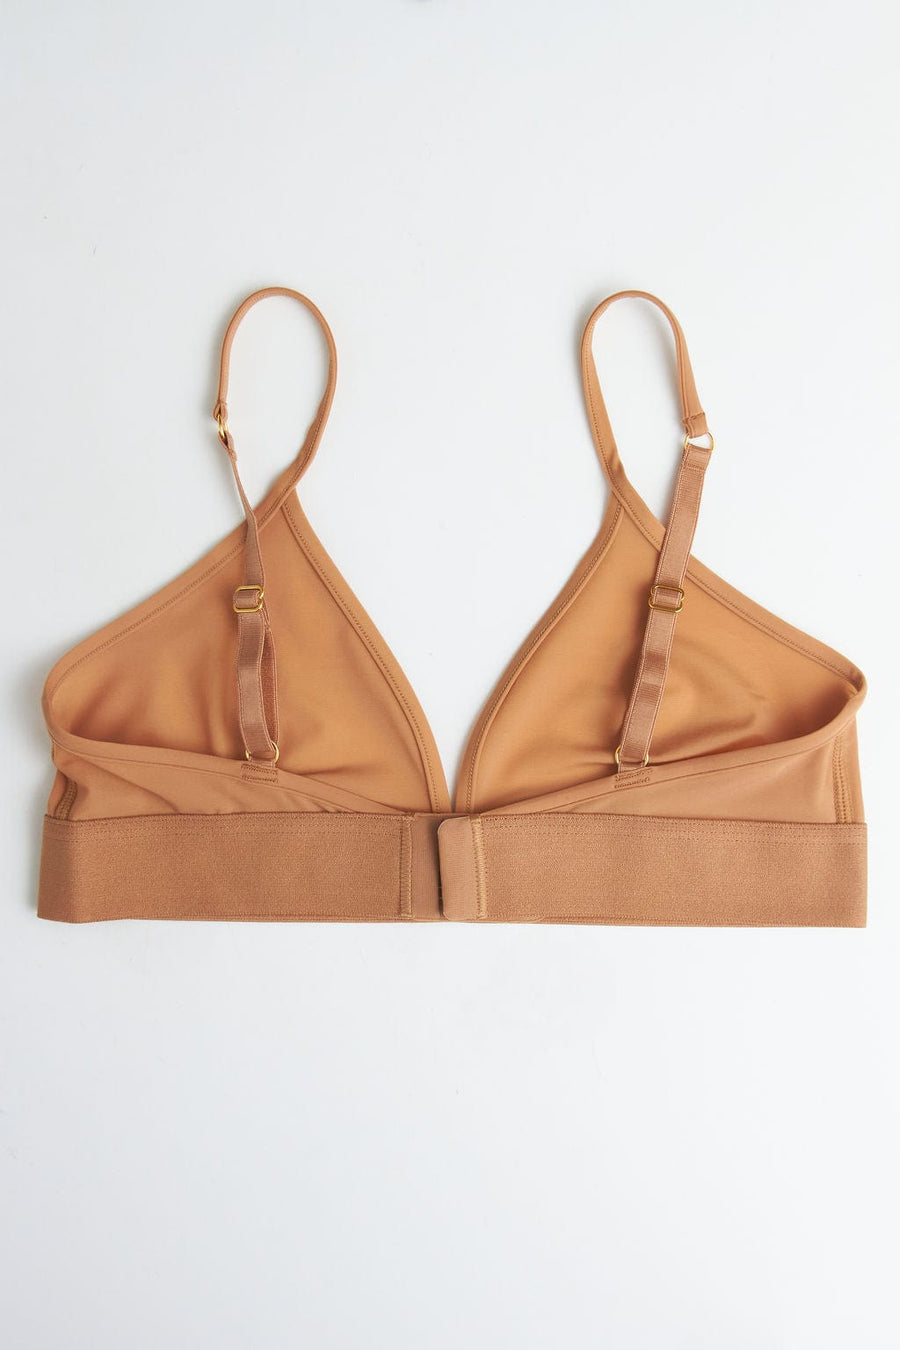 Sheer Bralettes  The Best Bralettes for Small Busts – Pepper